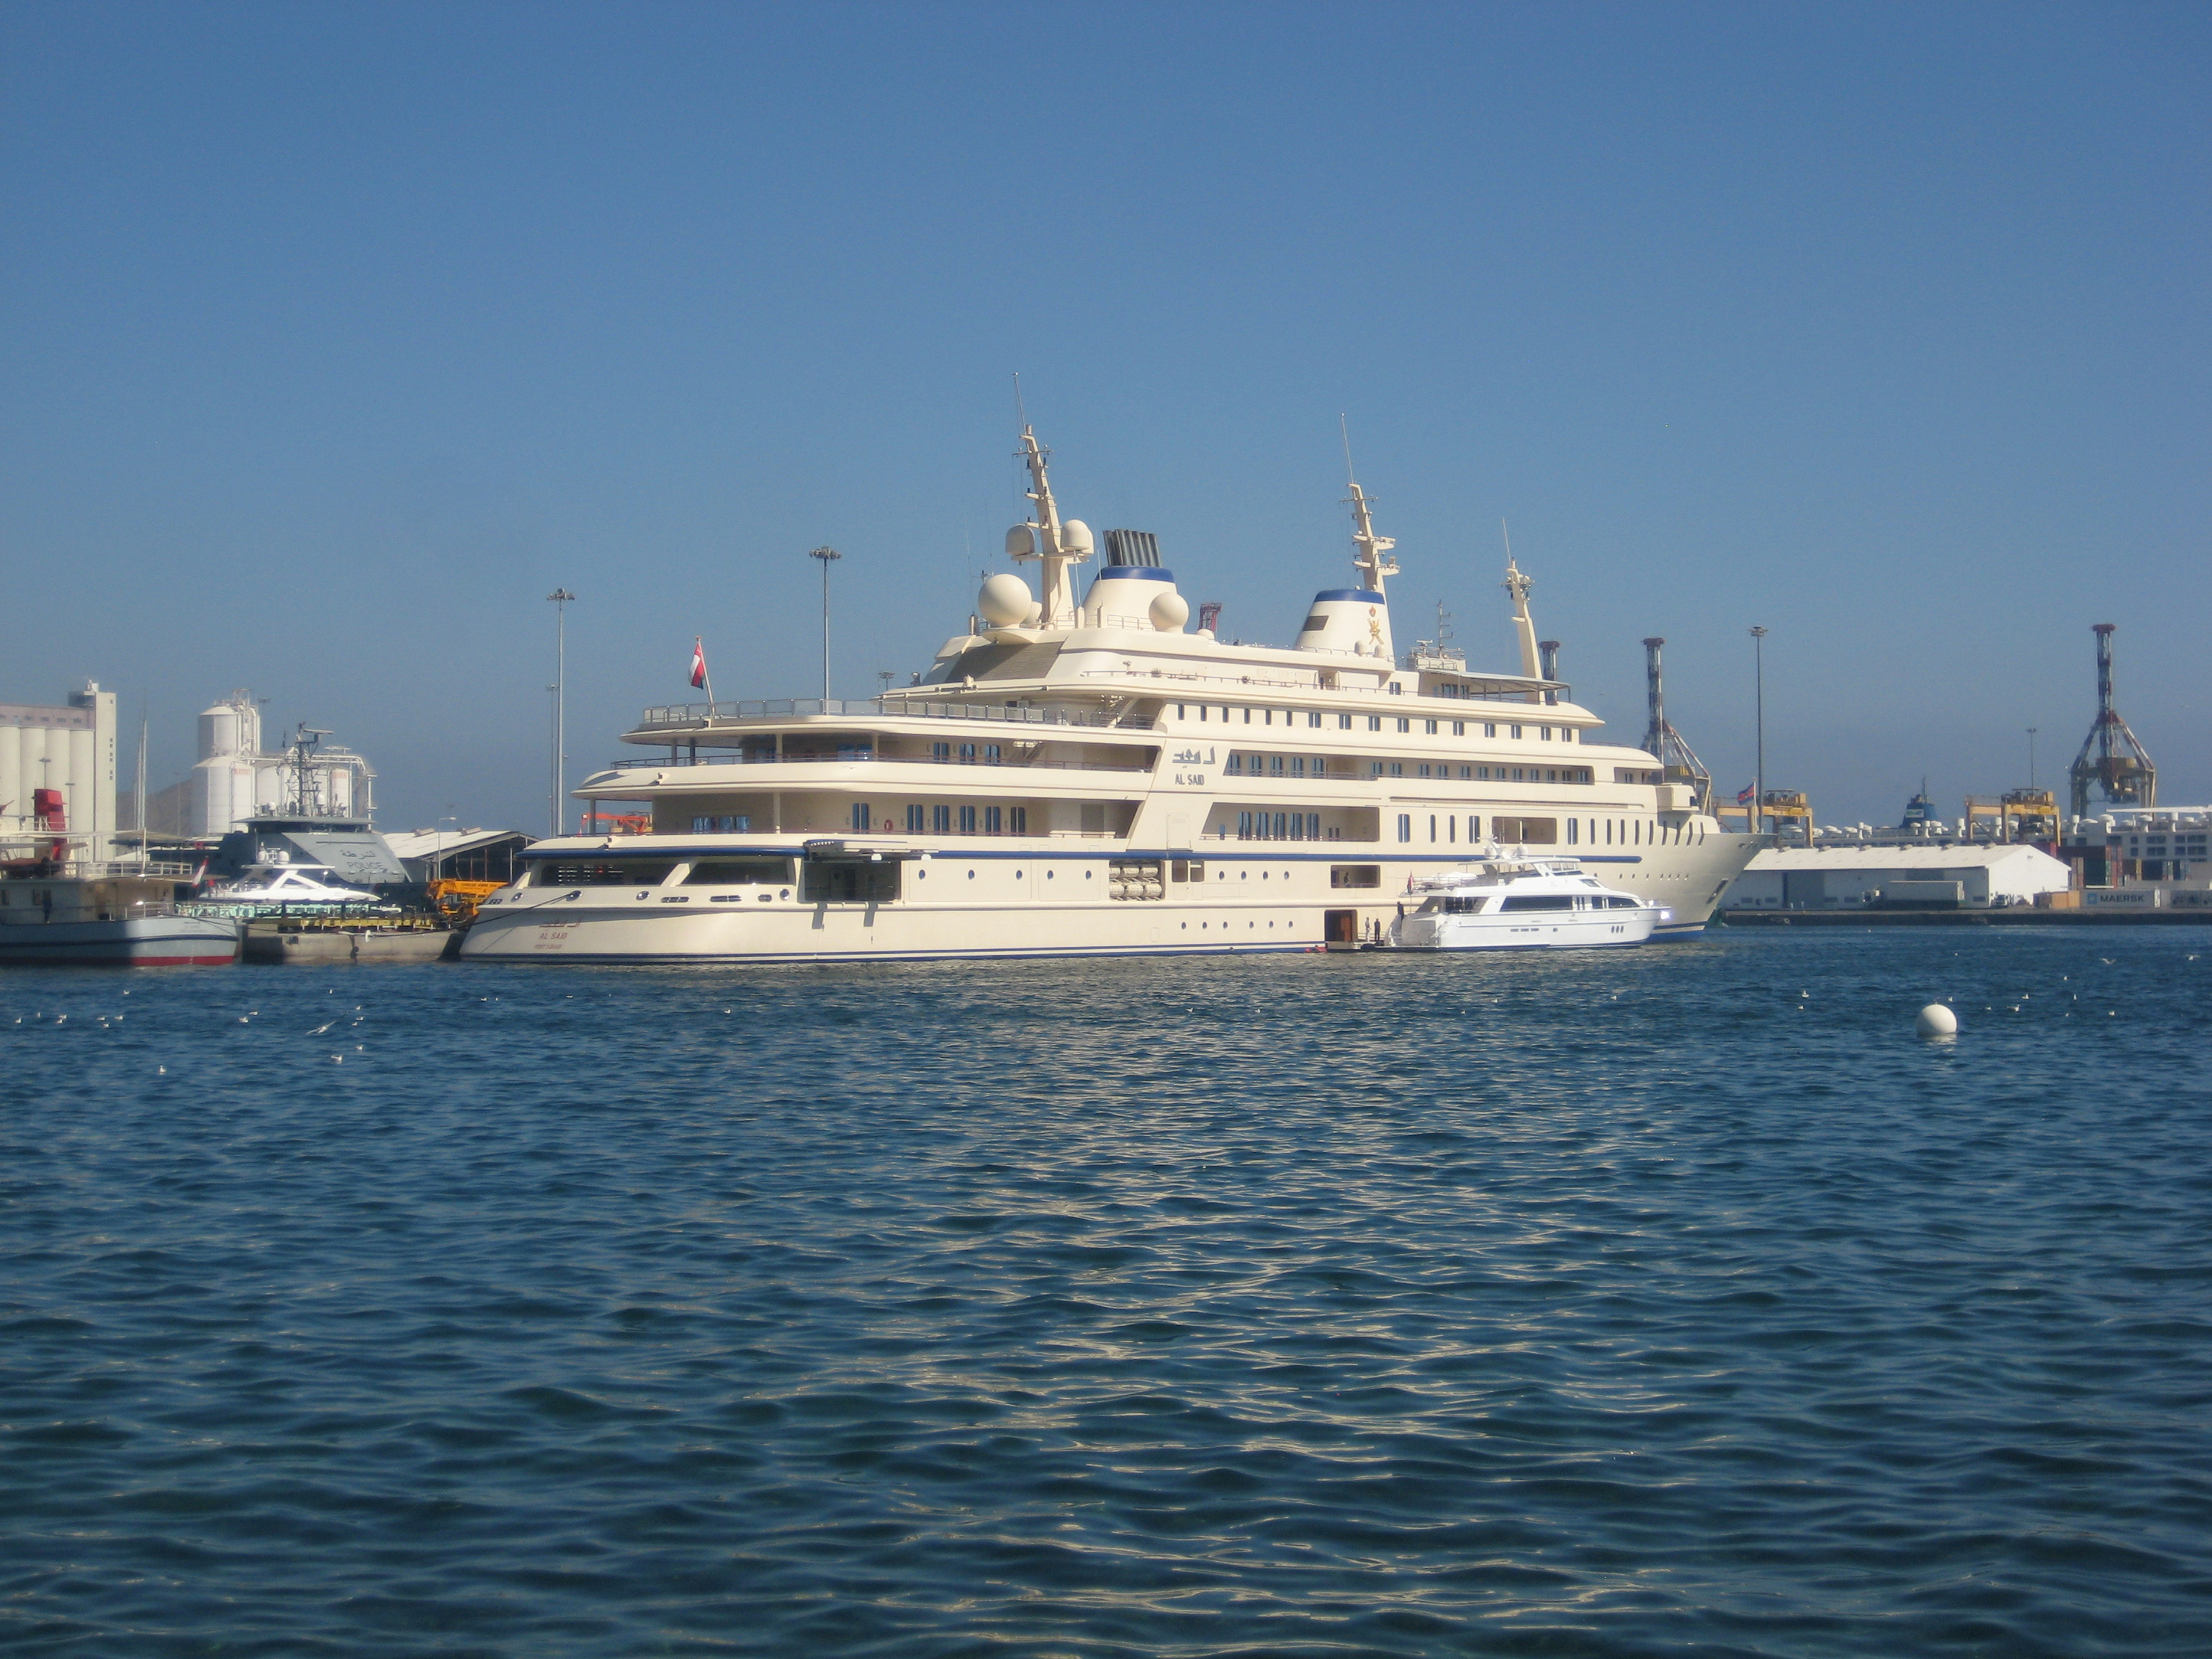 Engineering Marvel: Unraveling the Technical Innovations of the Largest Yacht's Construction